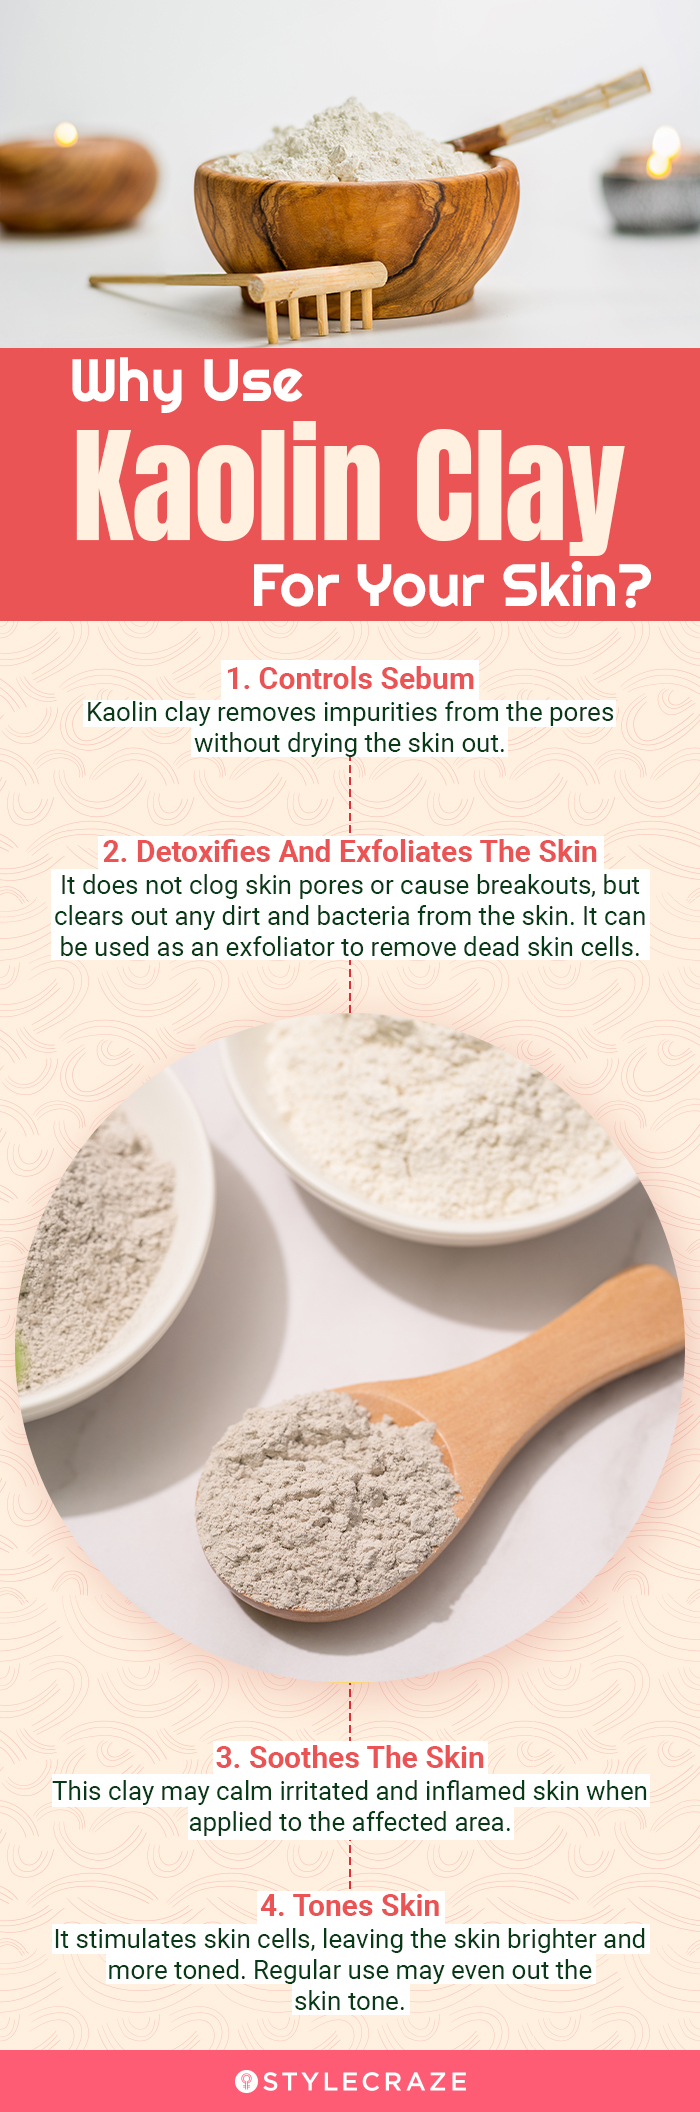 Kaolin Clay For Skin: What Is It, Benefits, And How To Use It